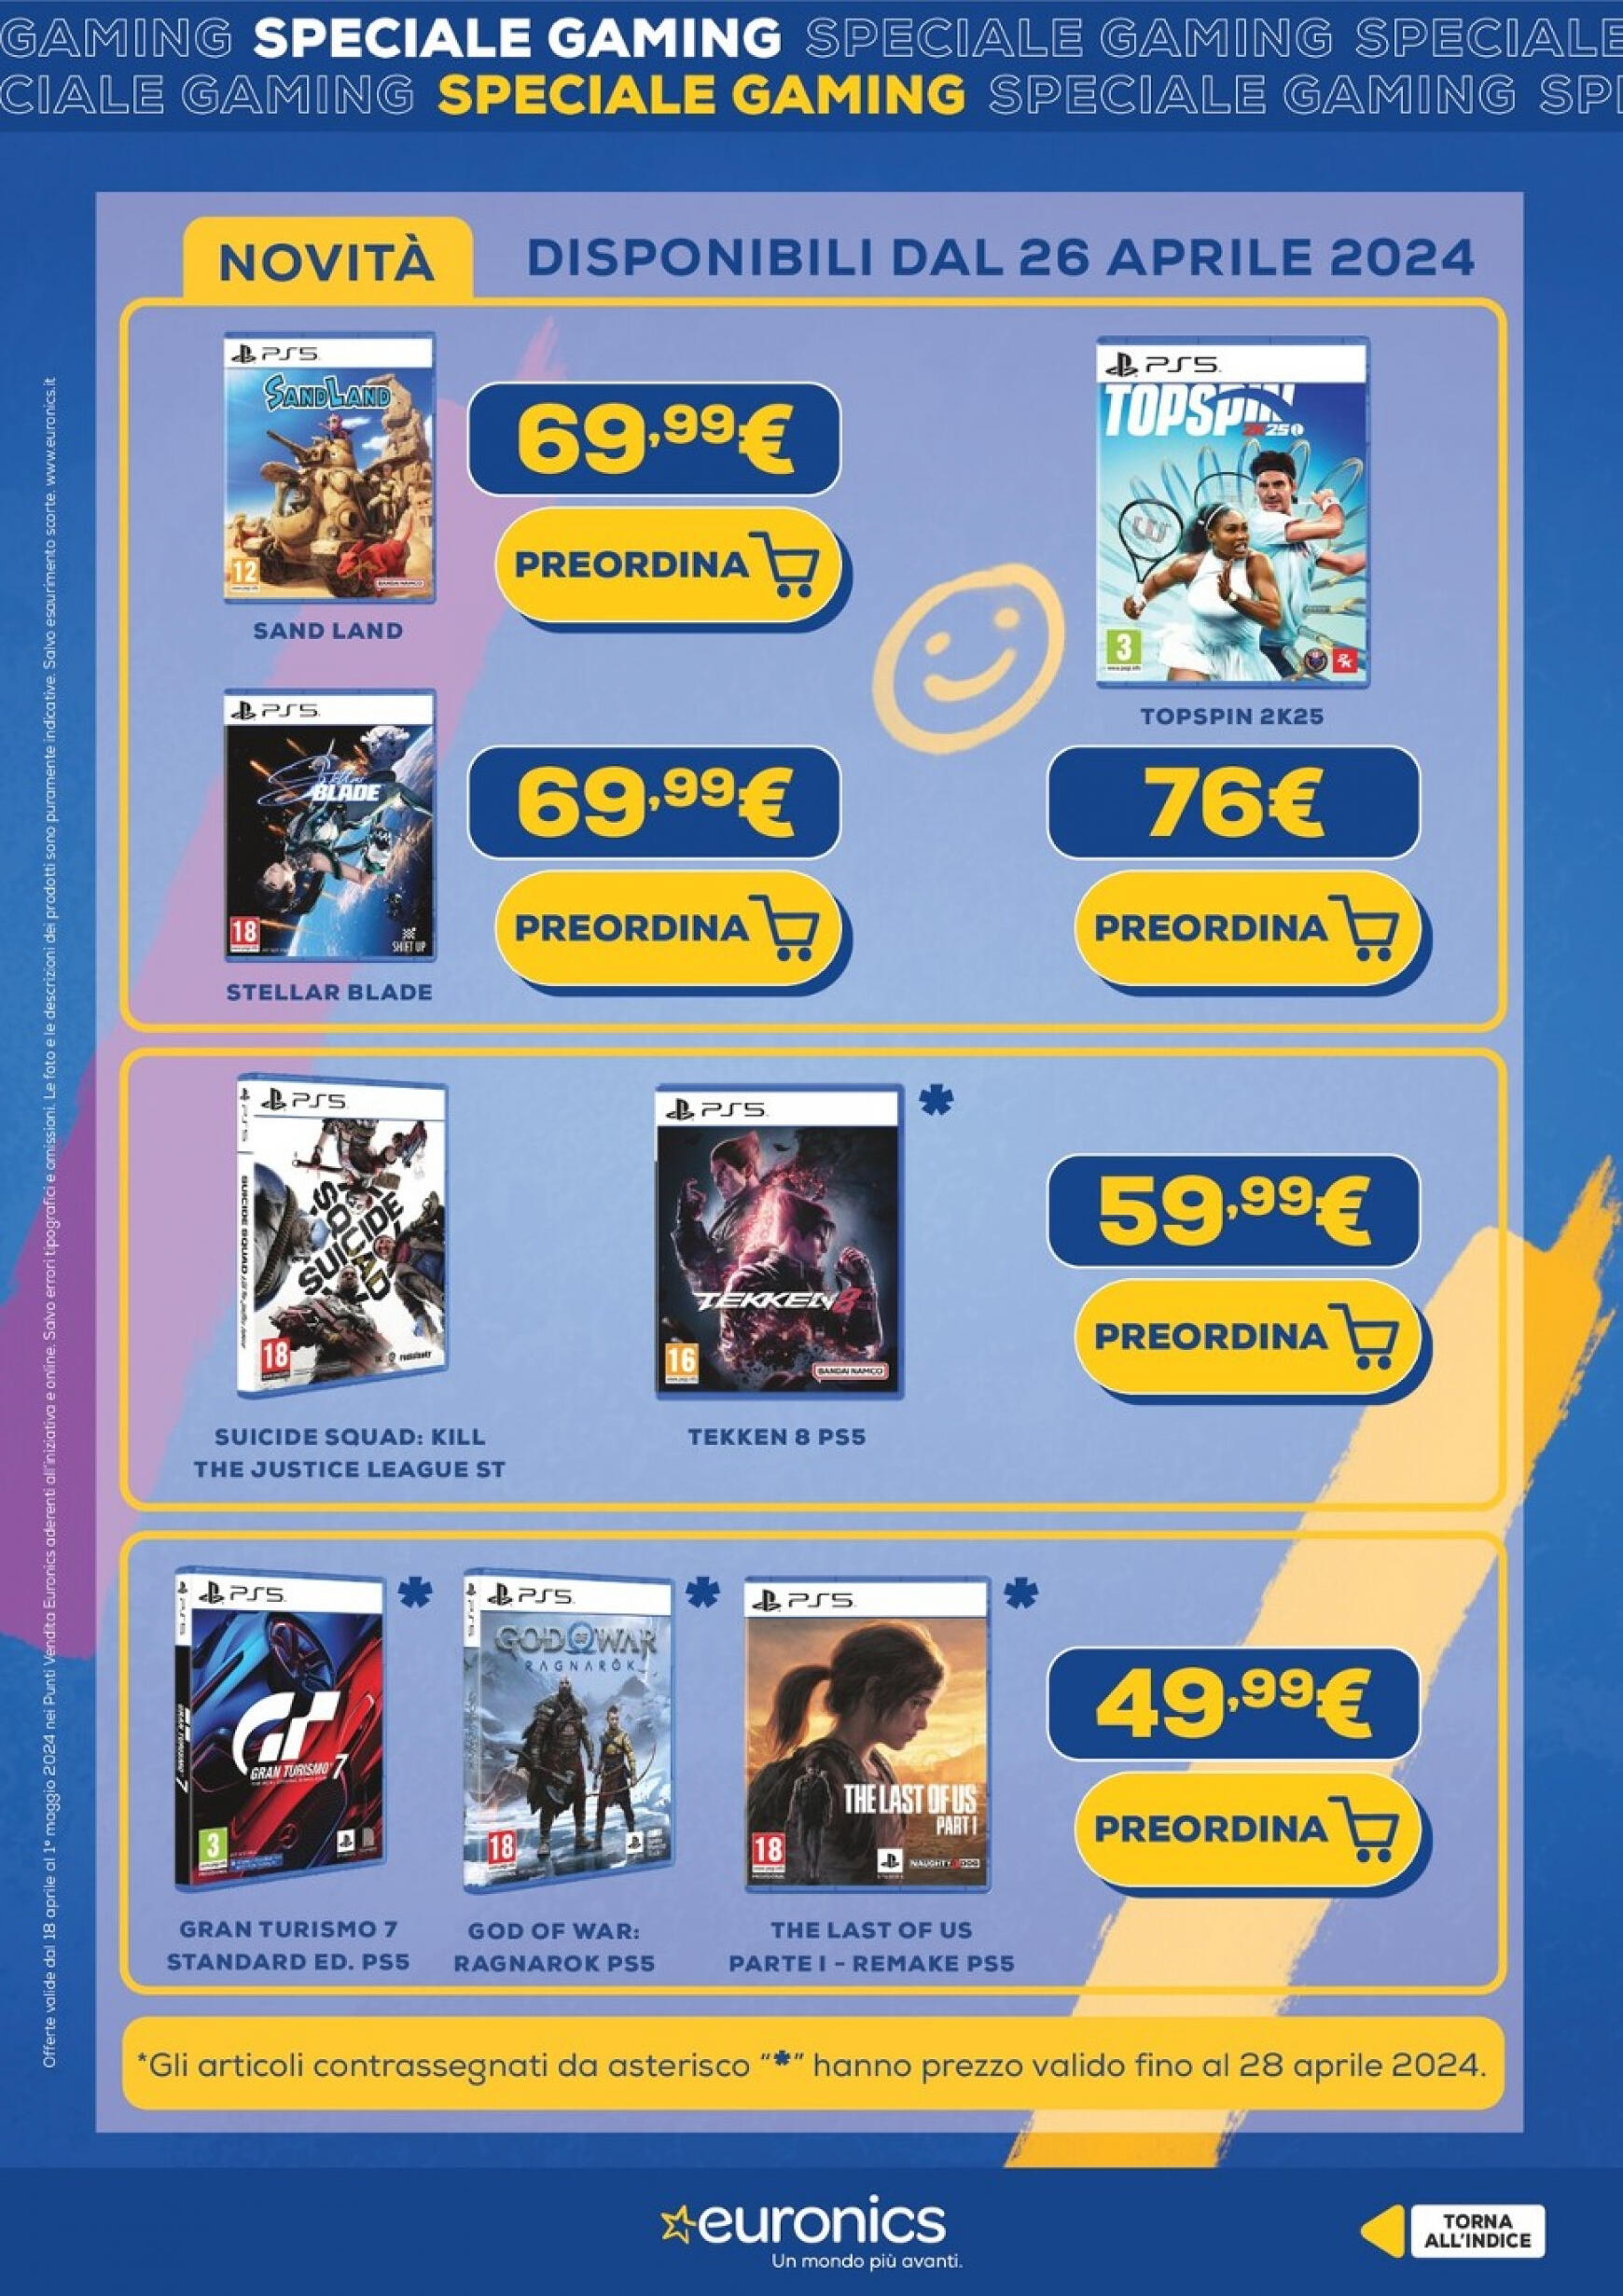 euronics - Nuovo volantino Euronics - Speciale Gaming 18.04. - 01.05. - page: 30